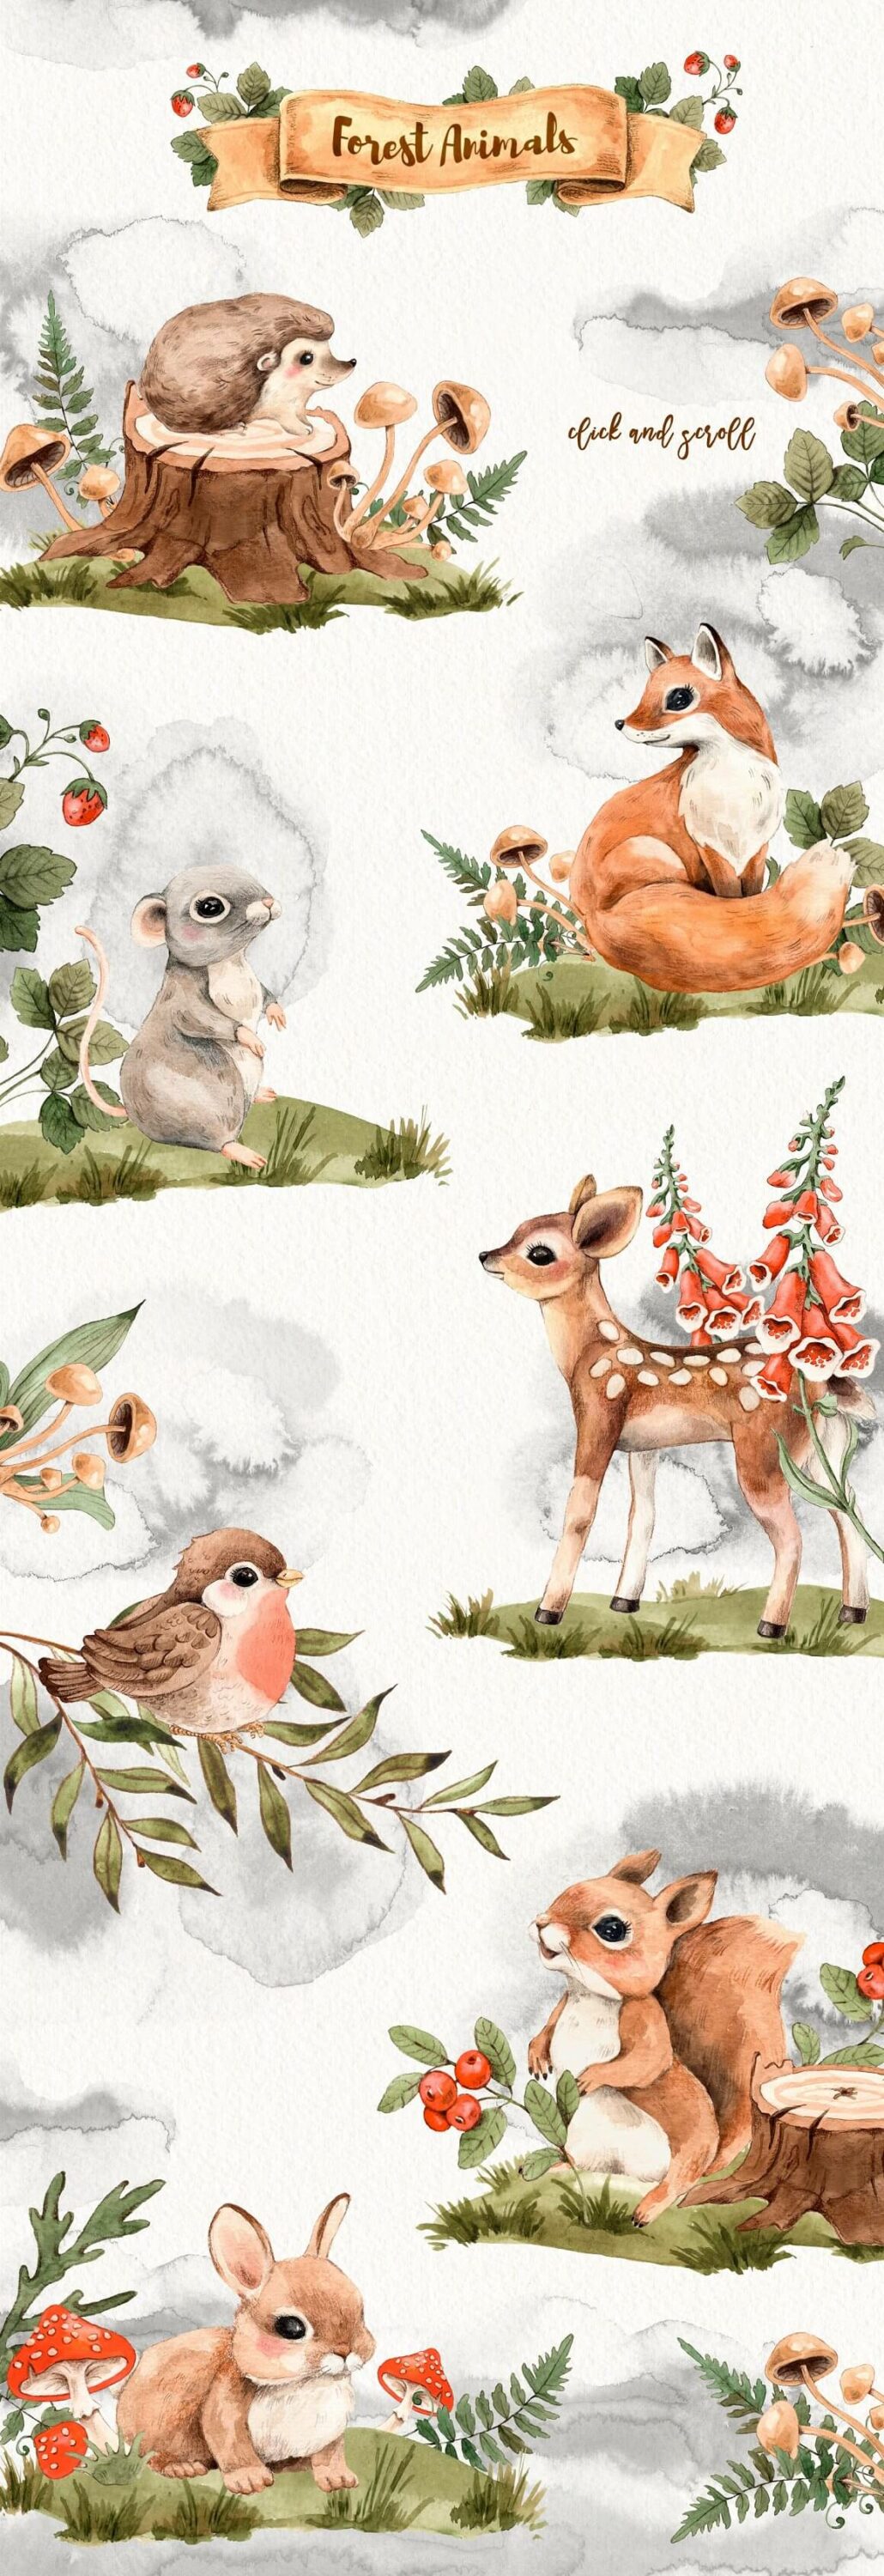 Long picture with small forest animals.